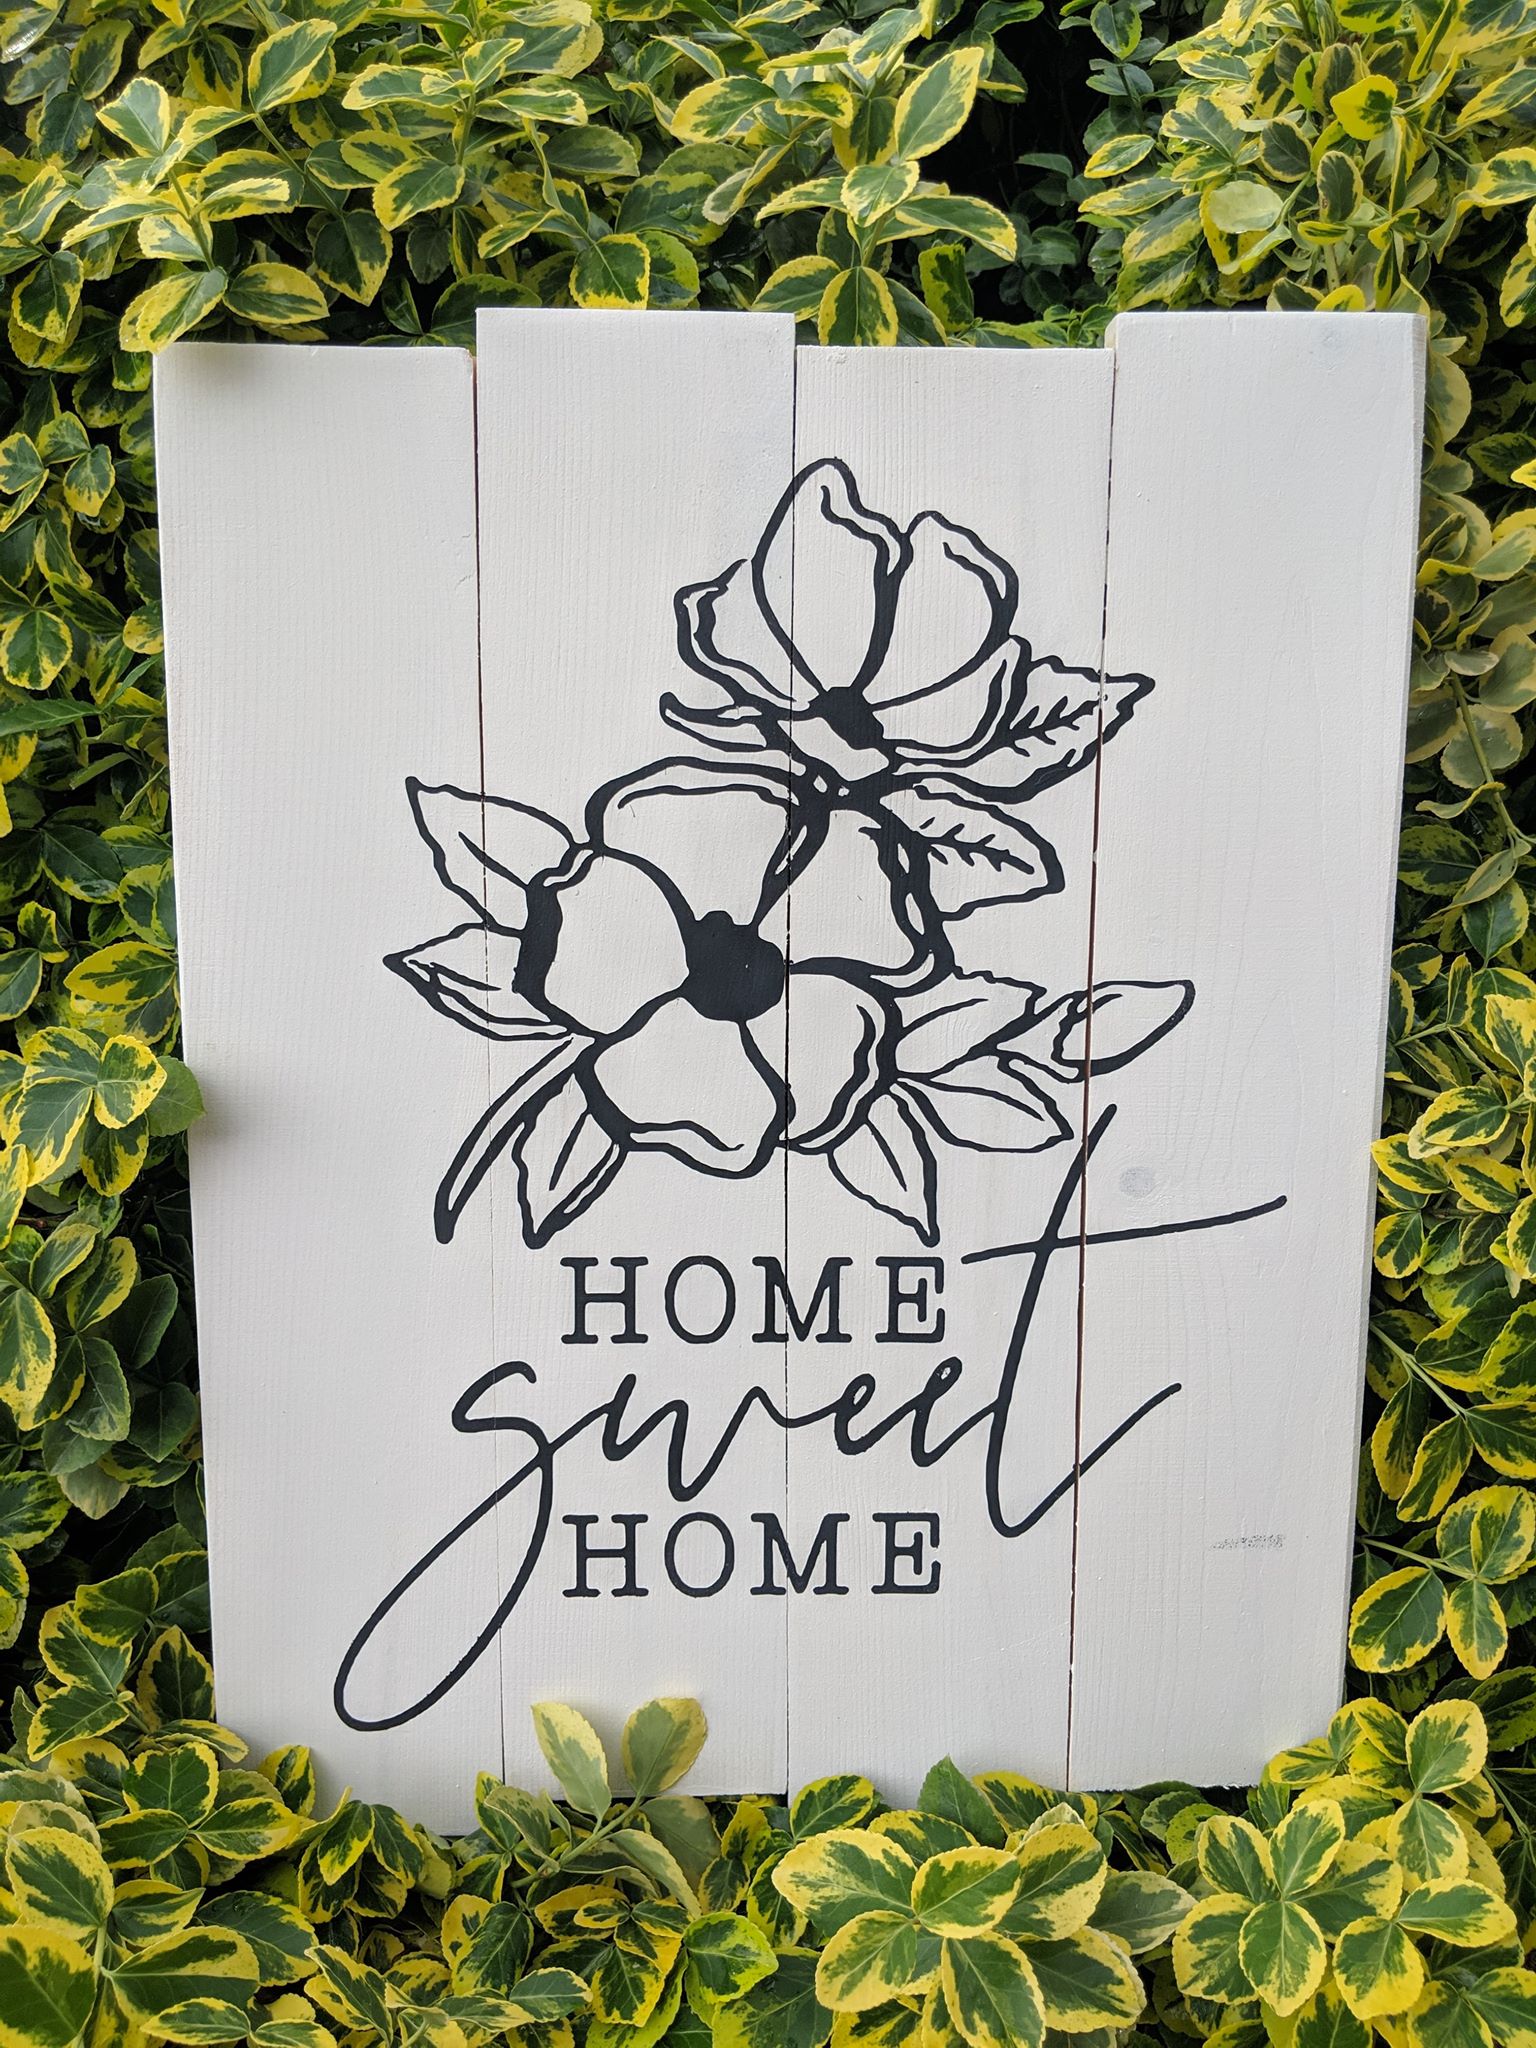 Home sweet home with flower